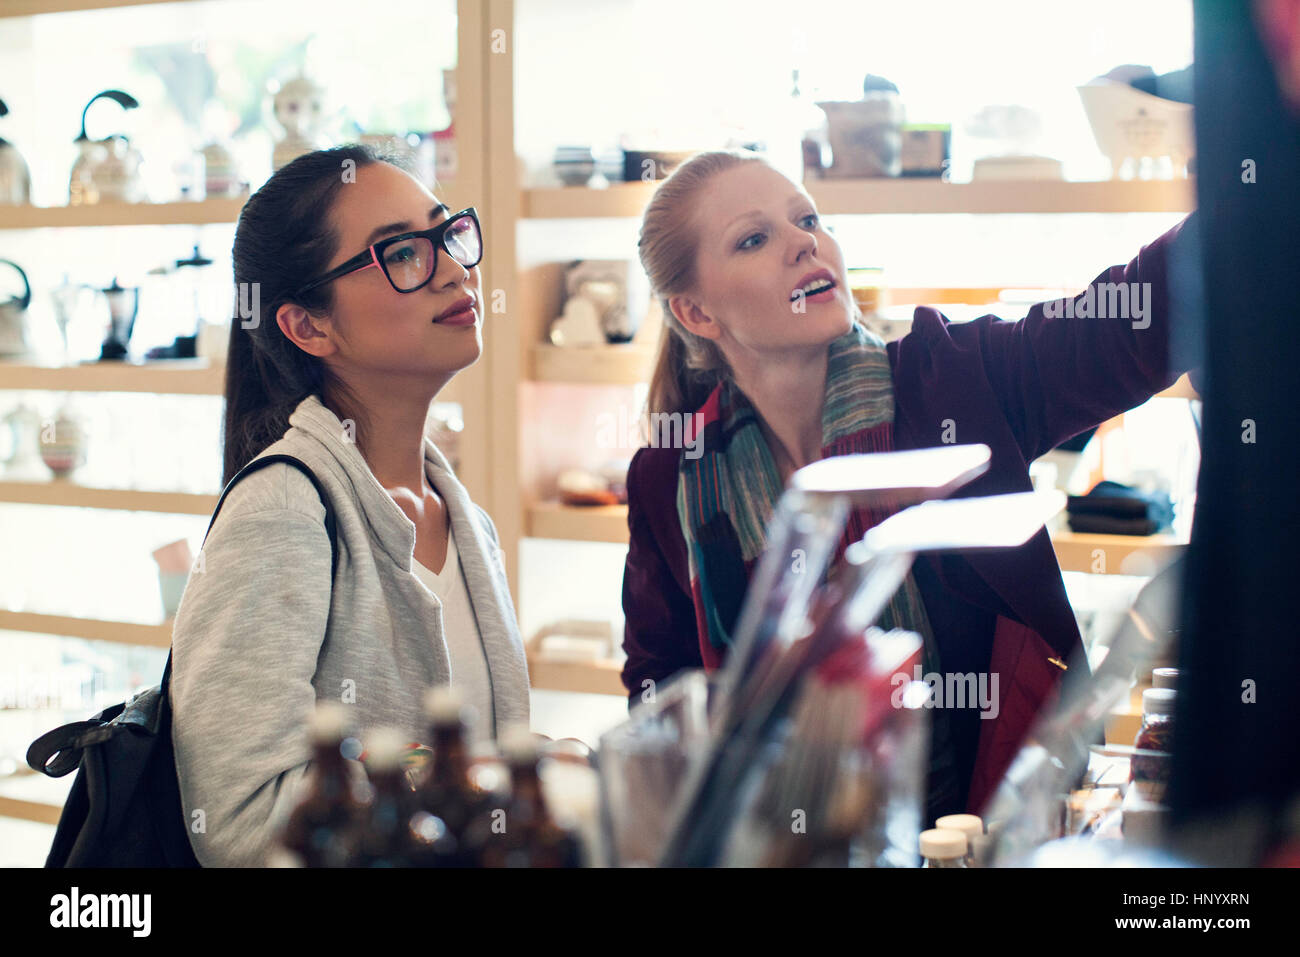 Women shopping together Stock Photo